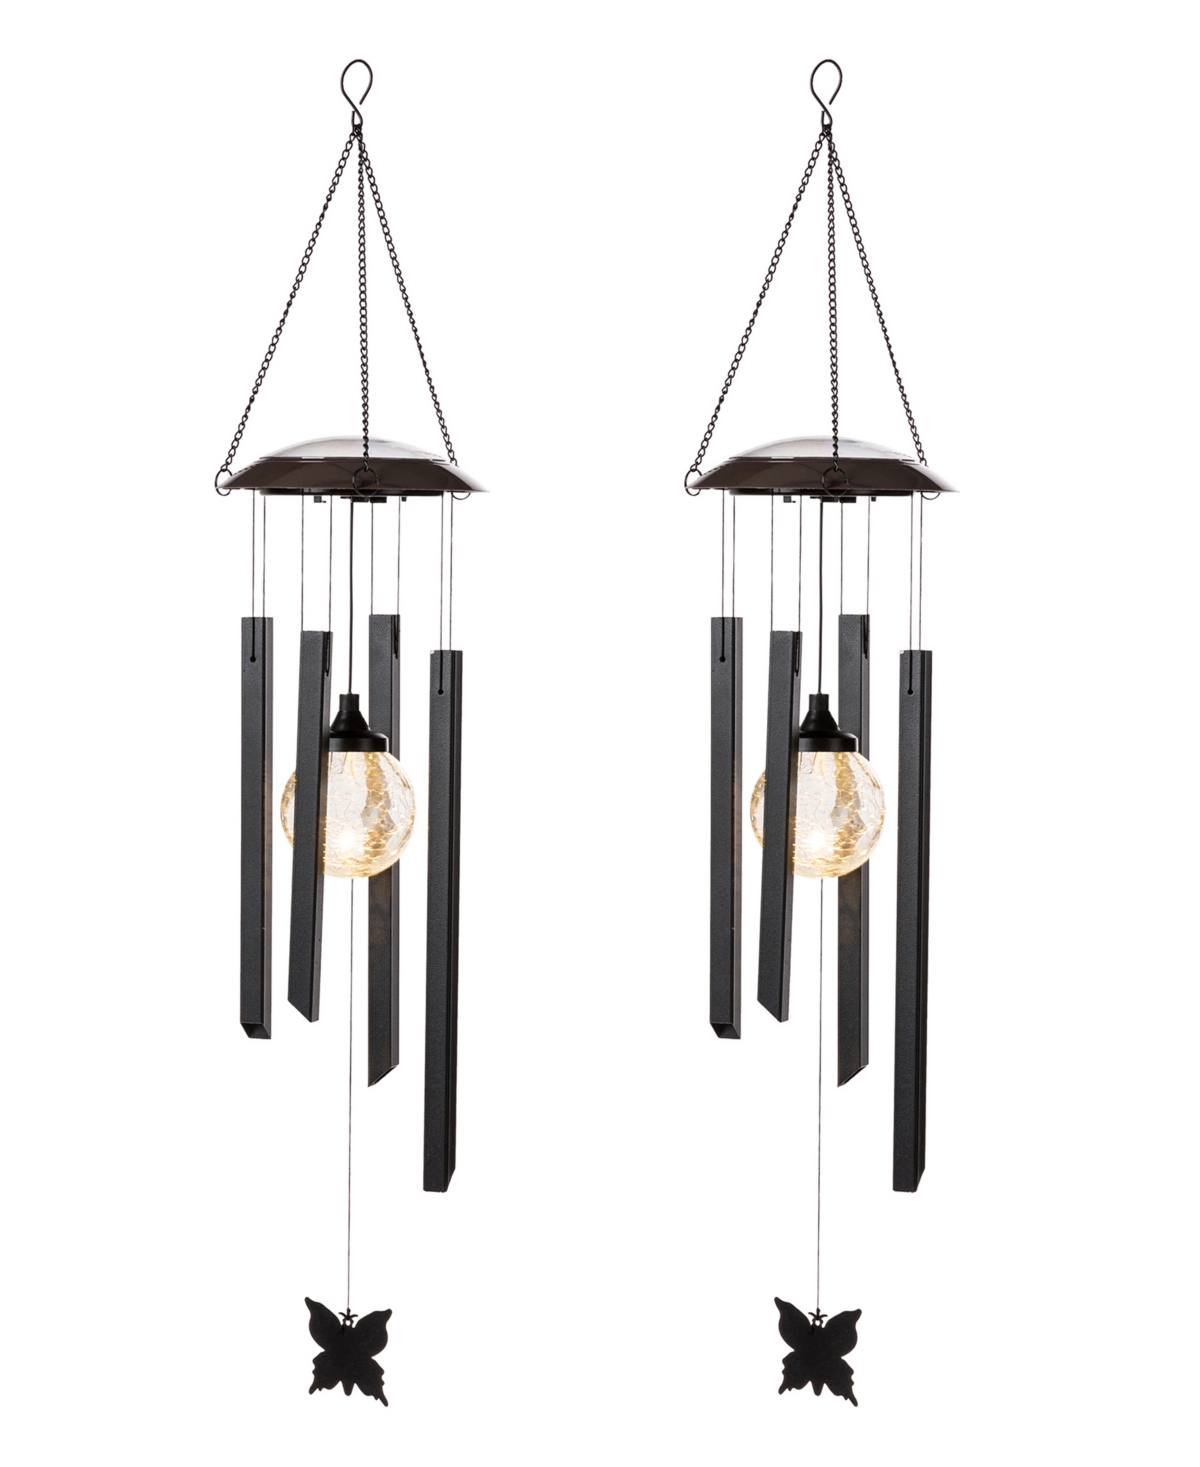 32" H Set of 2 Solar Powered Wind Chime with Crackle Bulb - Multi